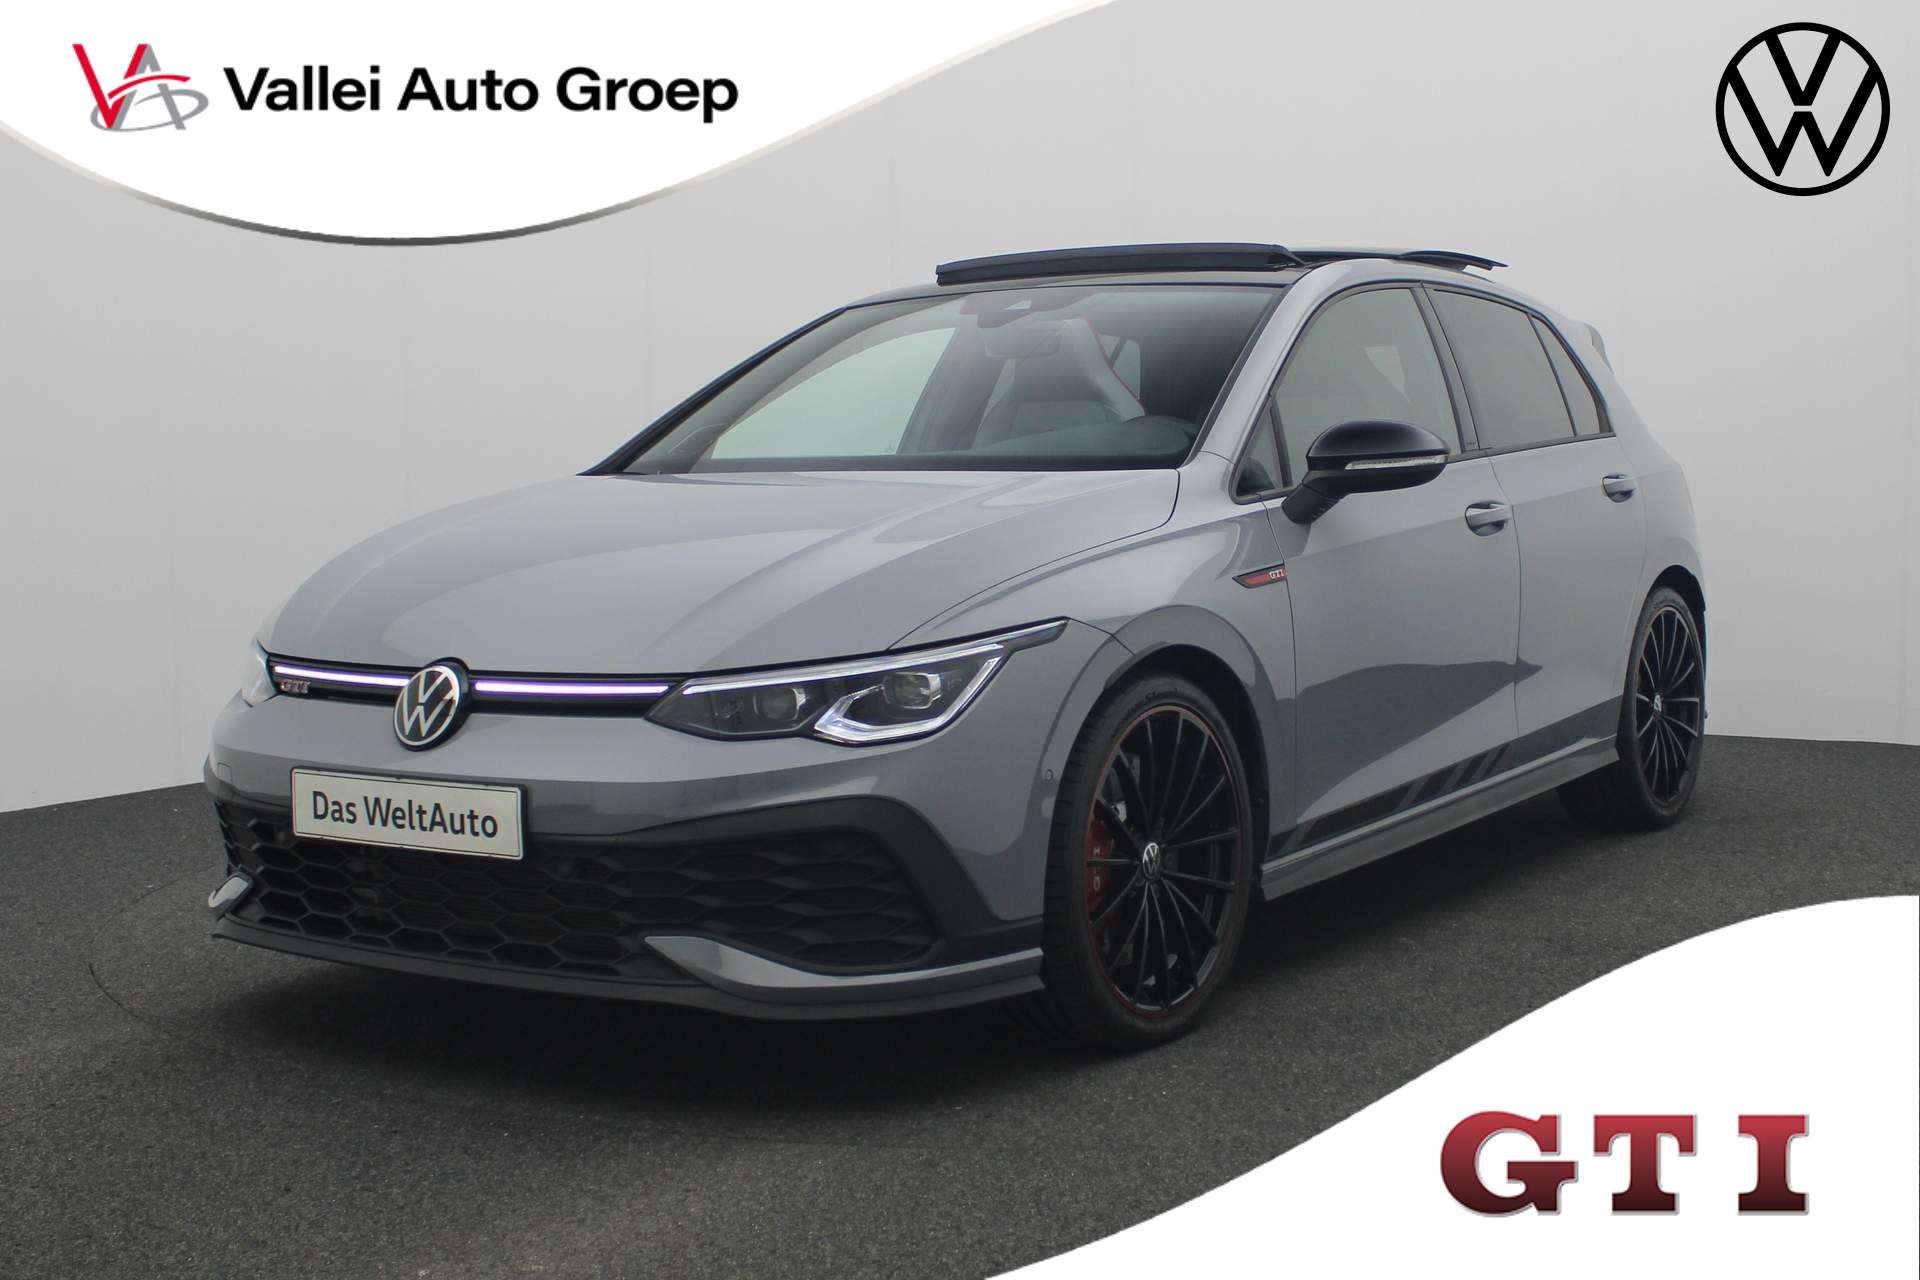 Volkswagen Golf Compact in Grey used in EDE GLD for € 54,950.-